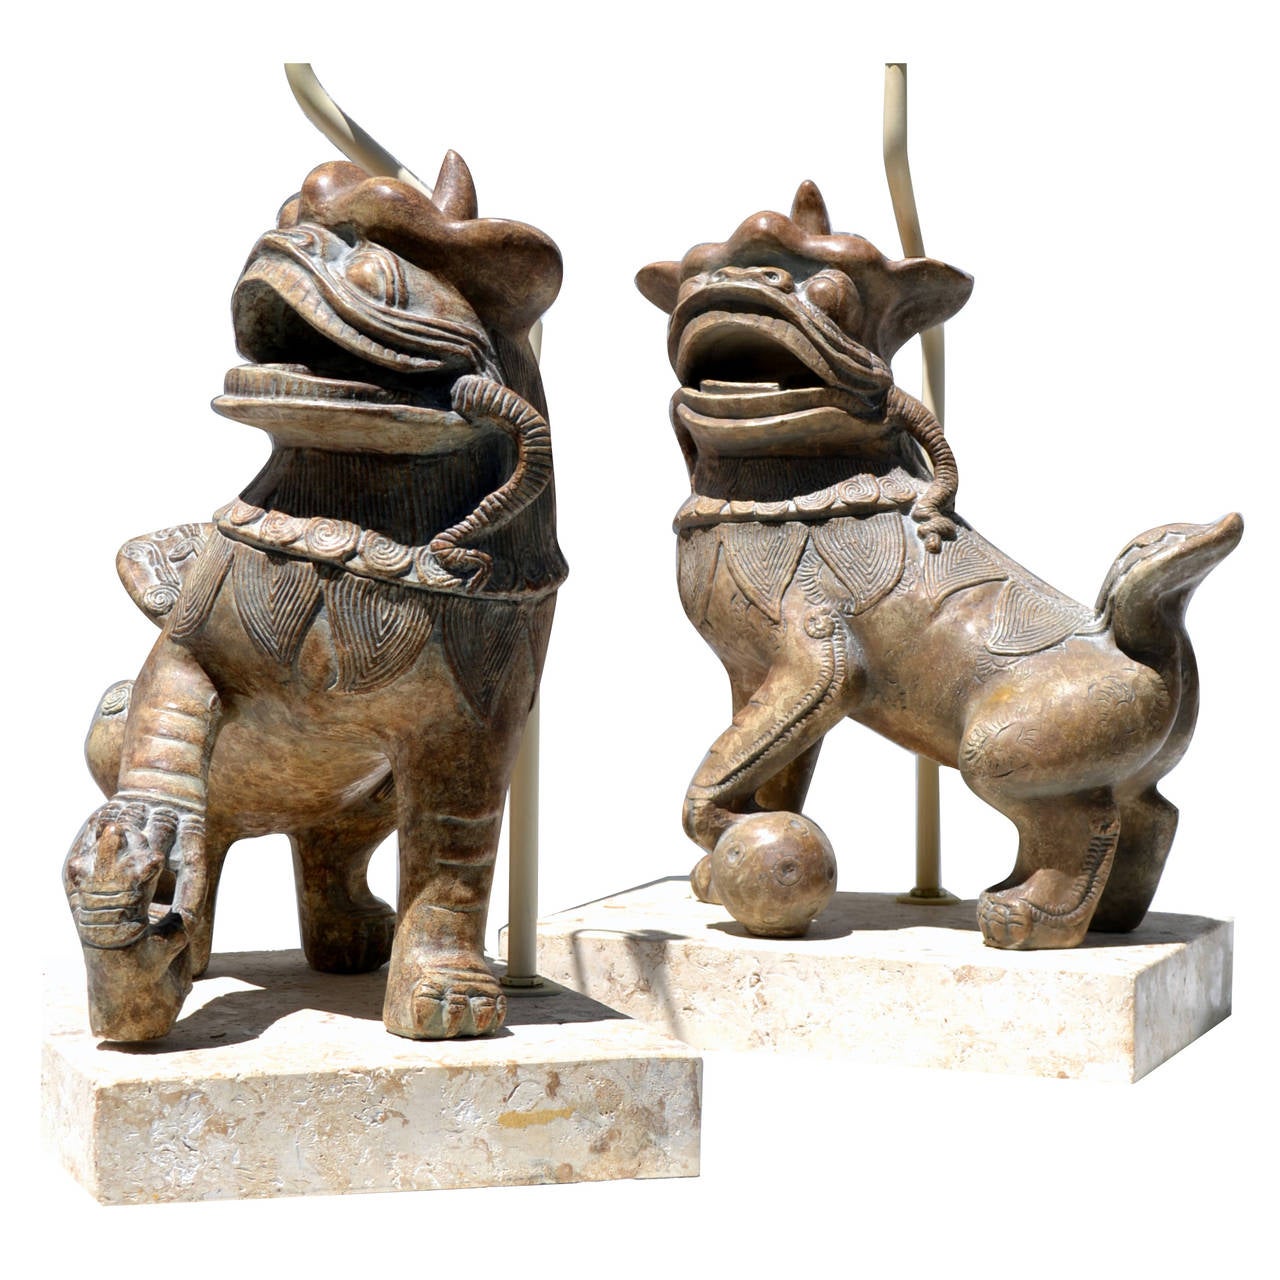 An unusual pair of Foo dog table lamps mounted on coral stone bases in the style of Michael Taylor. 
The subtle glazed surfaces of the ceramic dogs are in stark contrast to the texture of the fossil stone bases.
The lamps are substantial the dogs